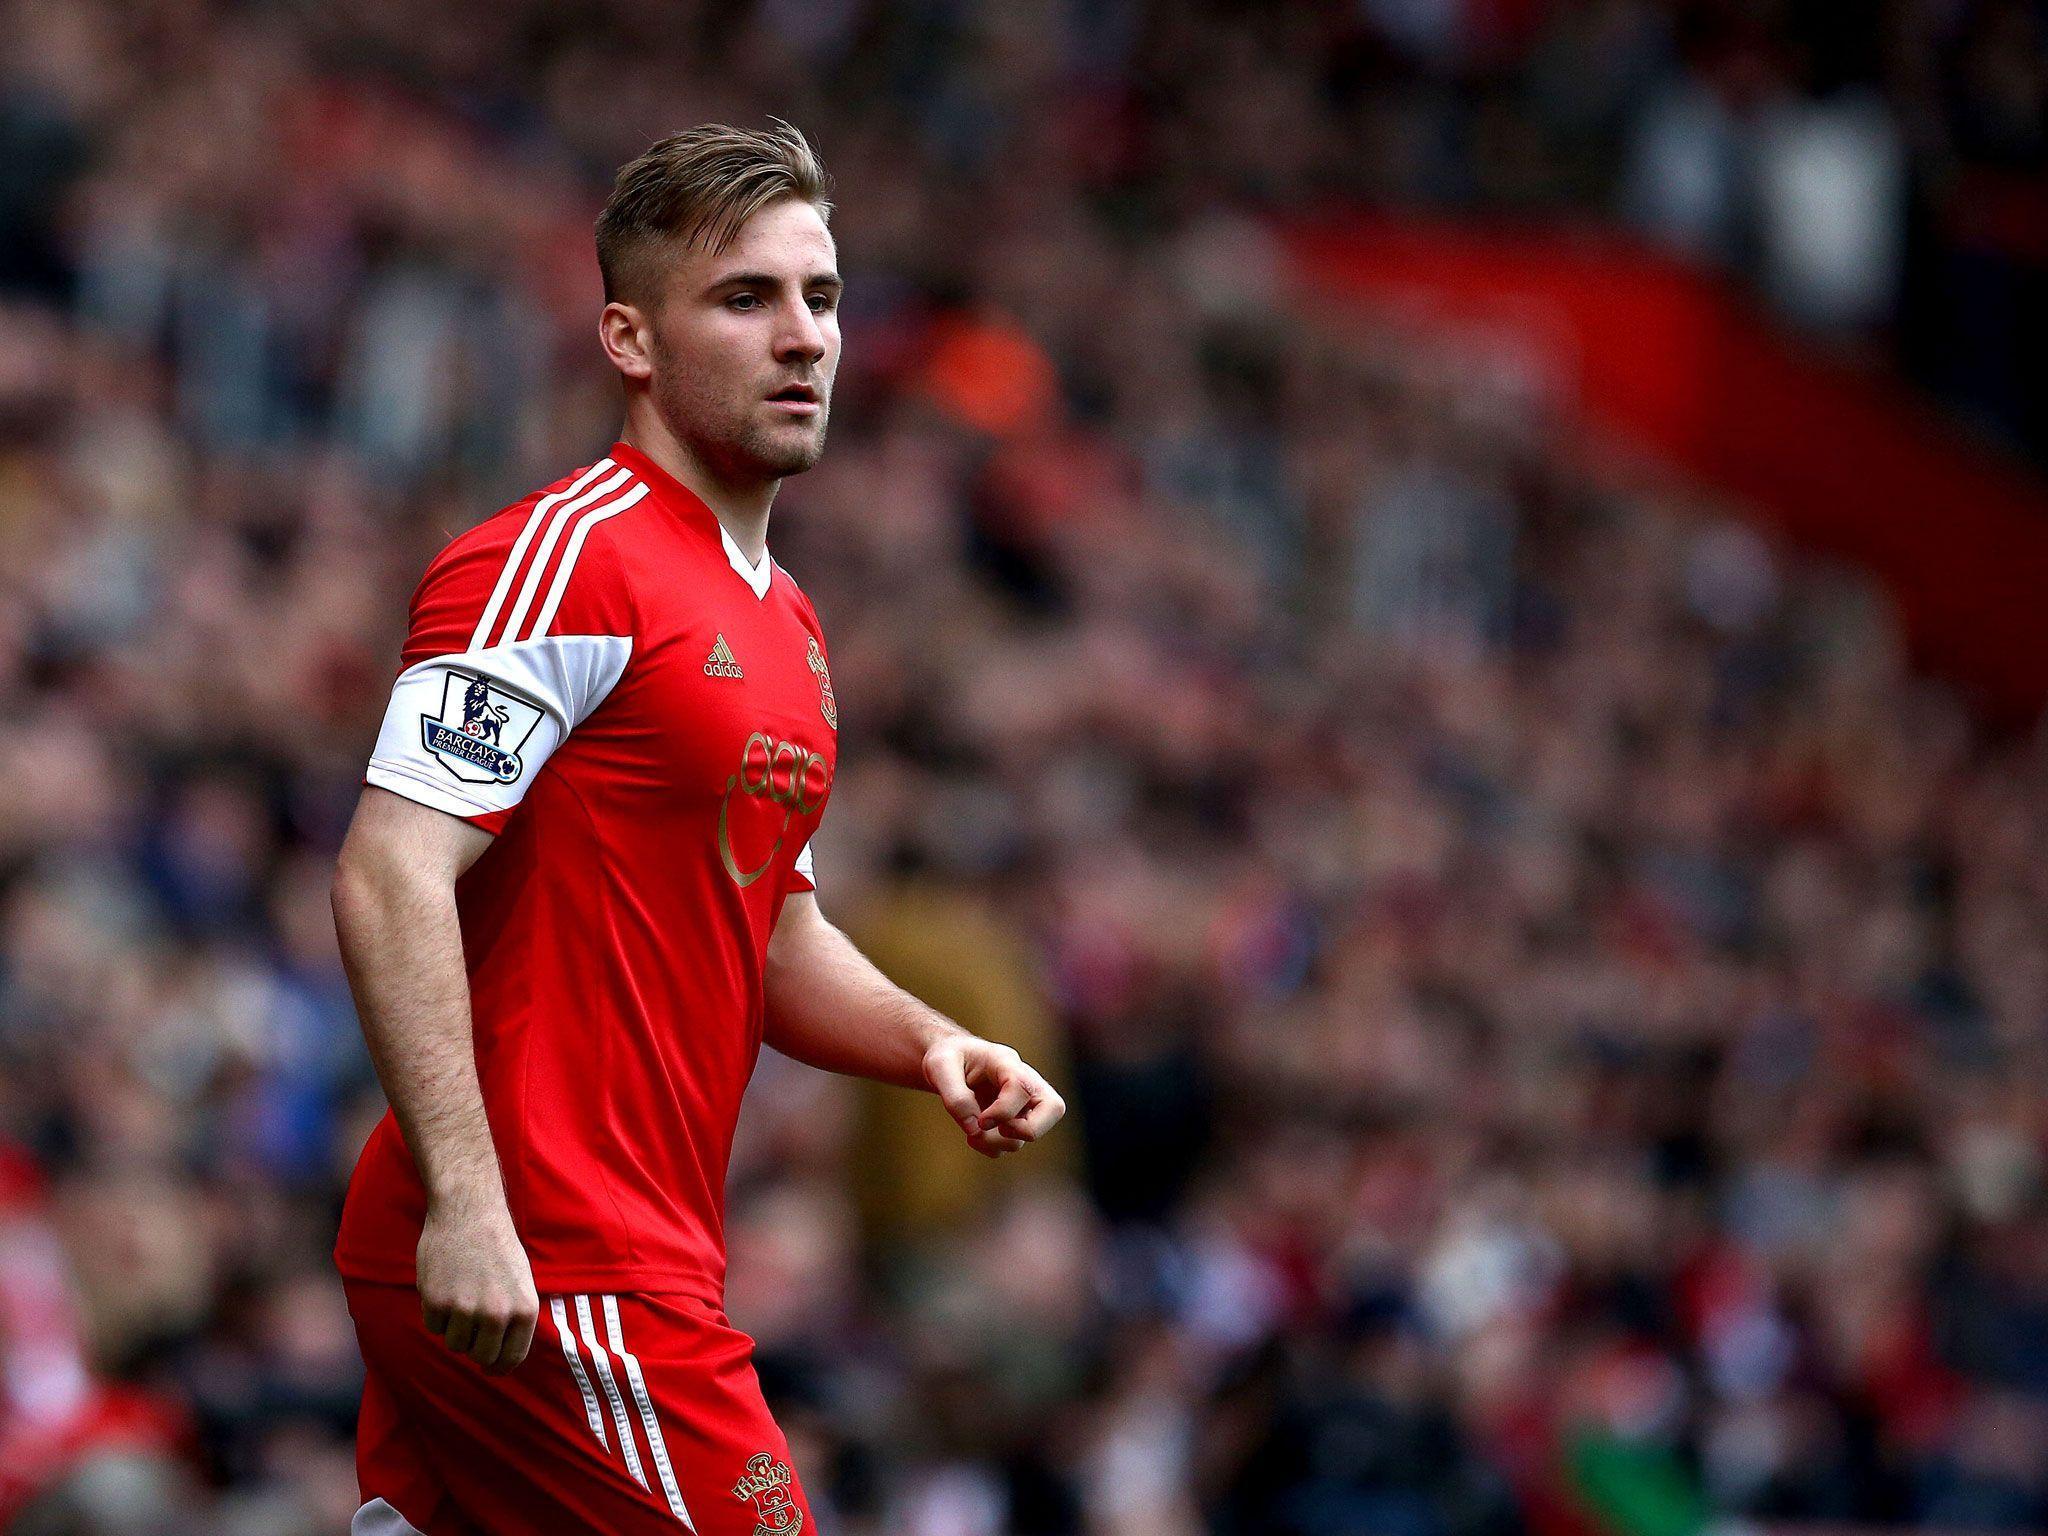 Luke Shaw: Manchester United face race against time to win duel as